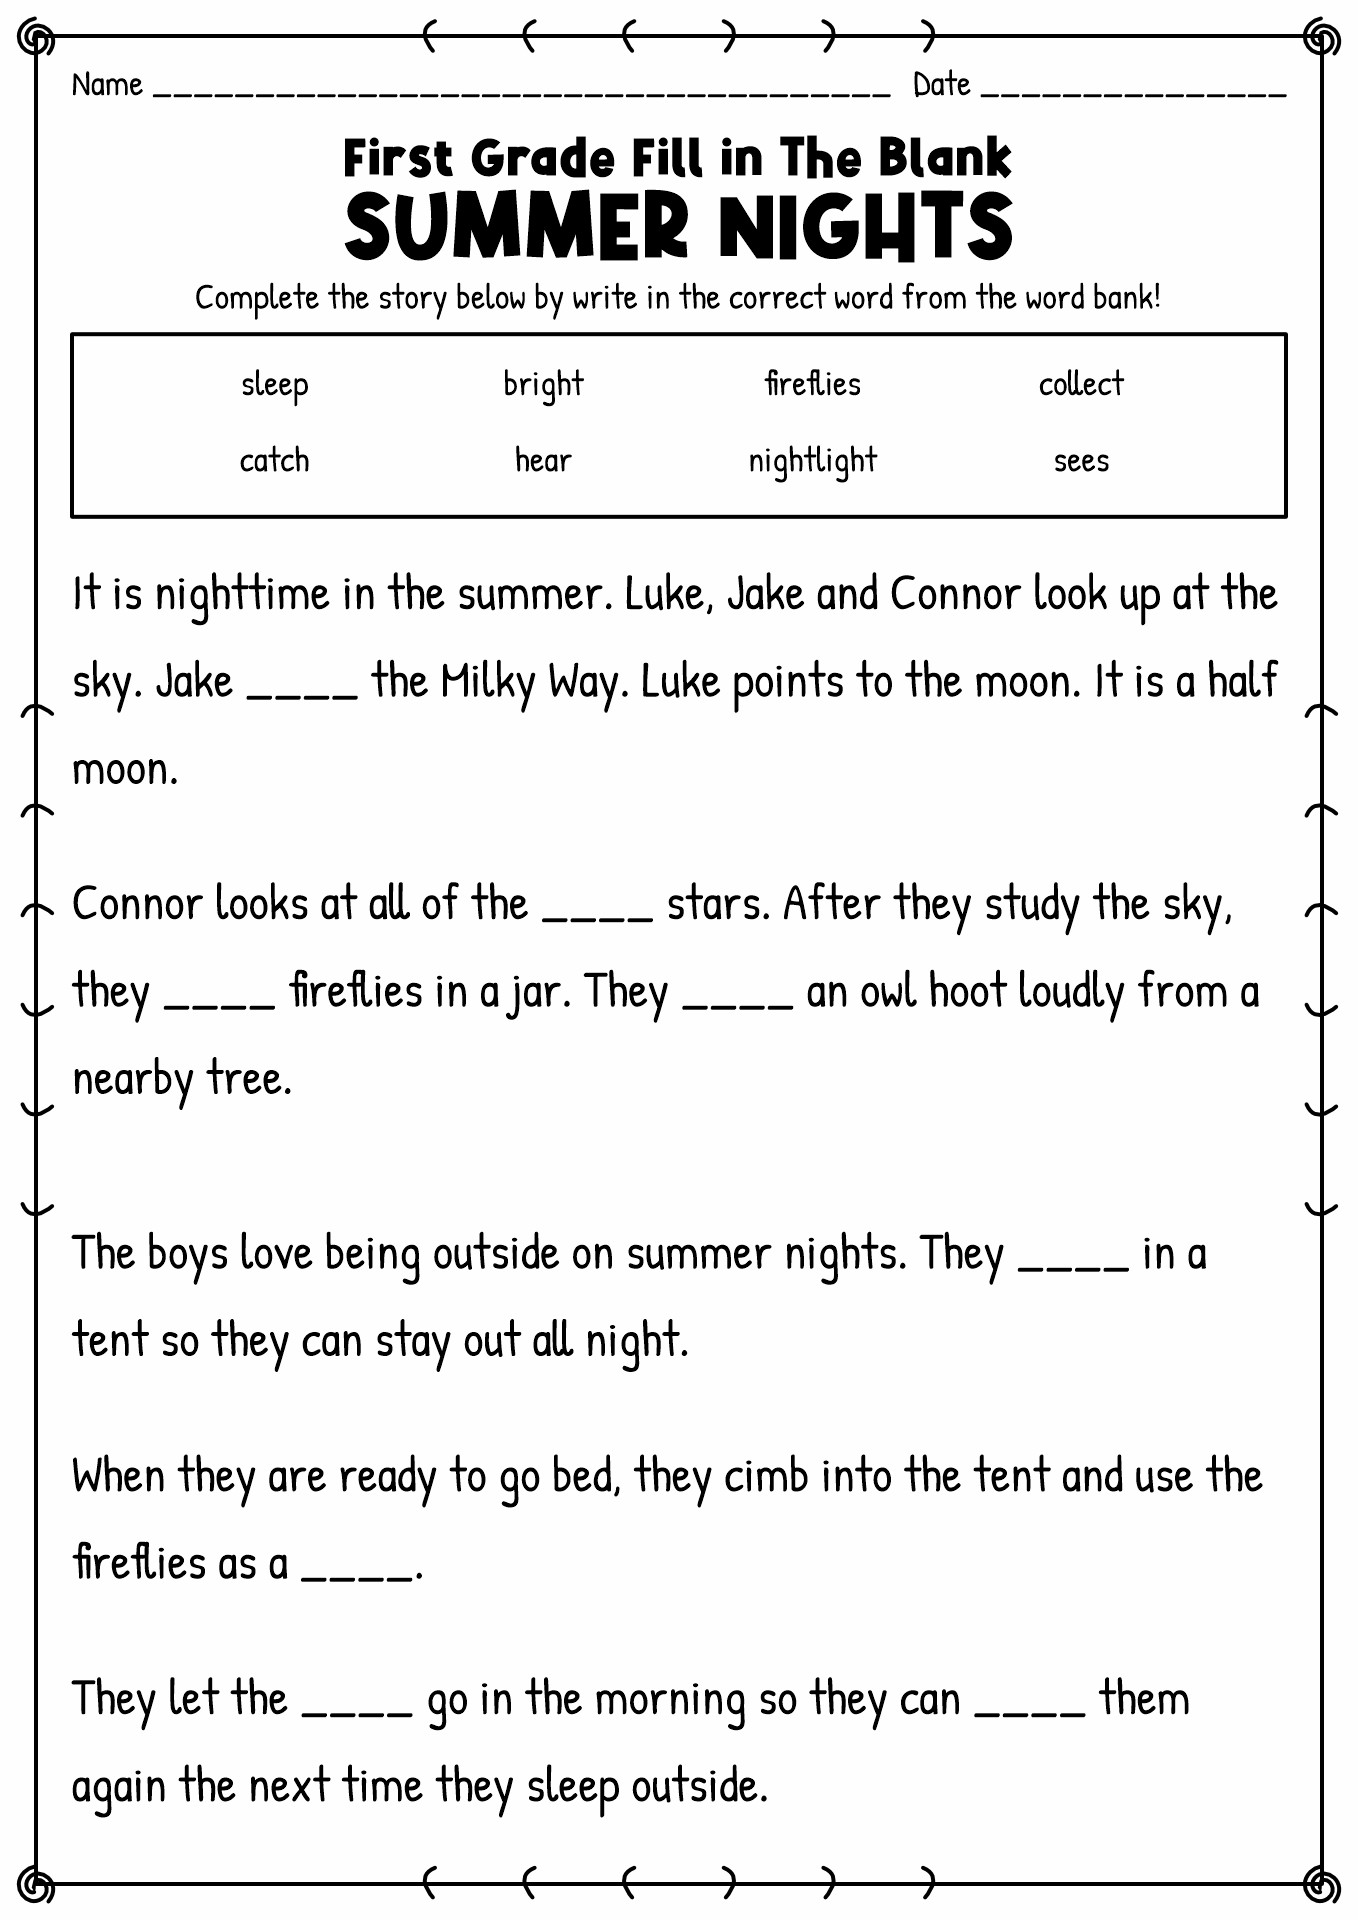 15-best-images-of-short-story-worksheets-story-sequencing-cut-and